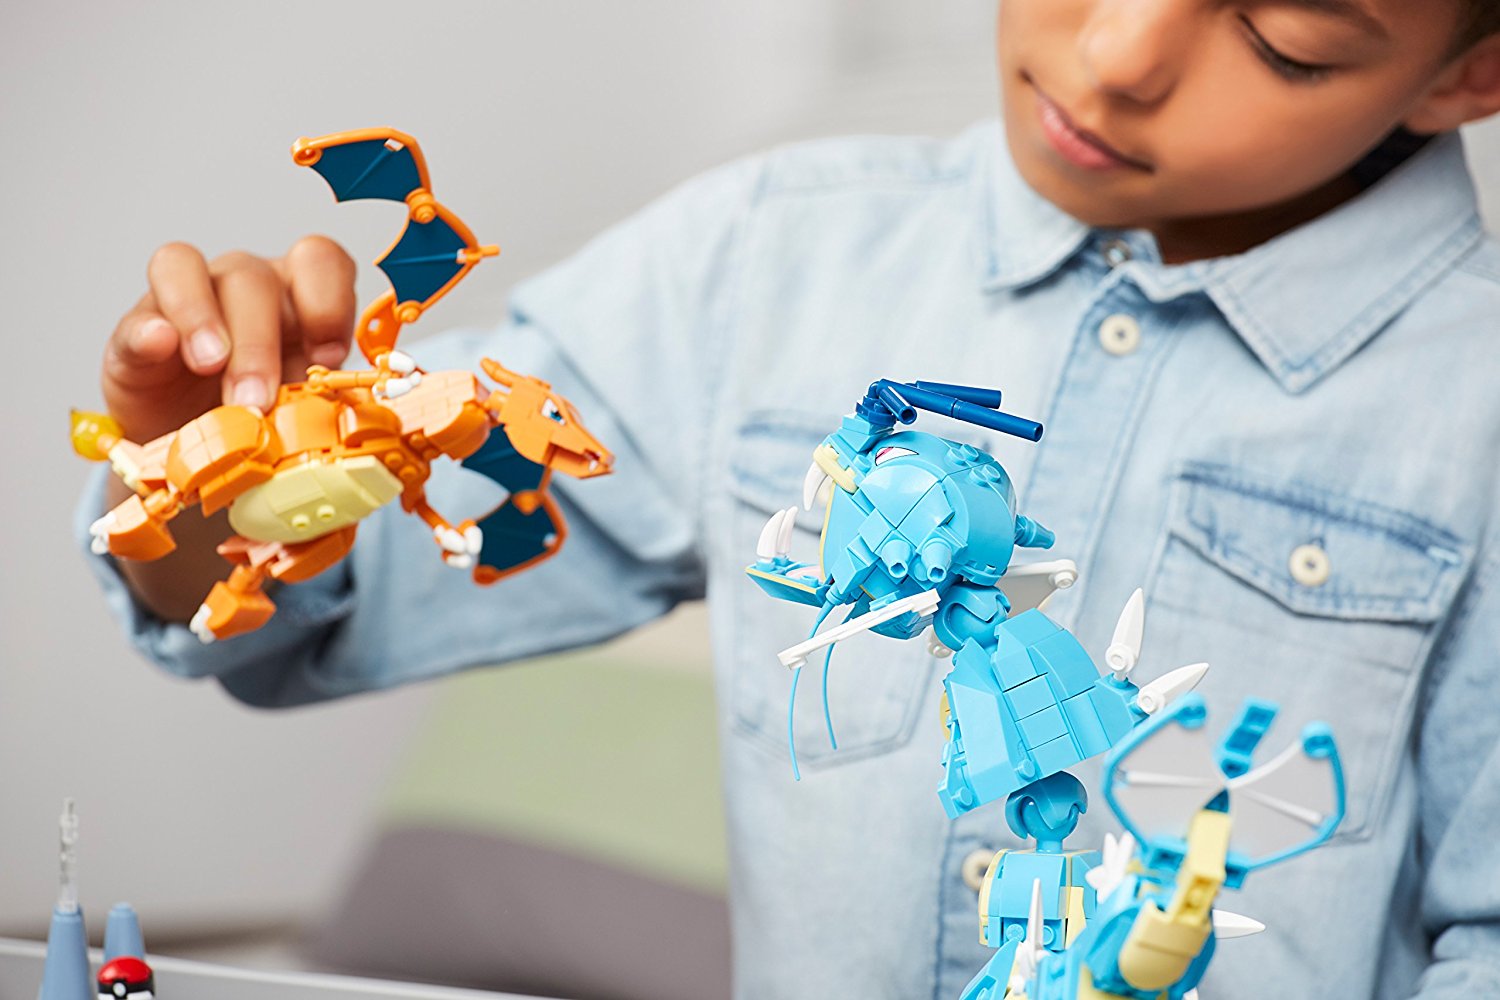 4 Mega Bloks Toys That Are the Best Gifts For Kids